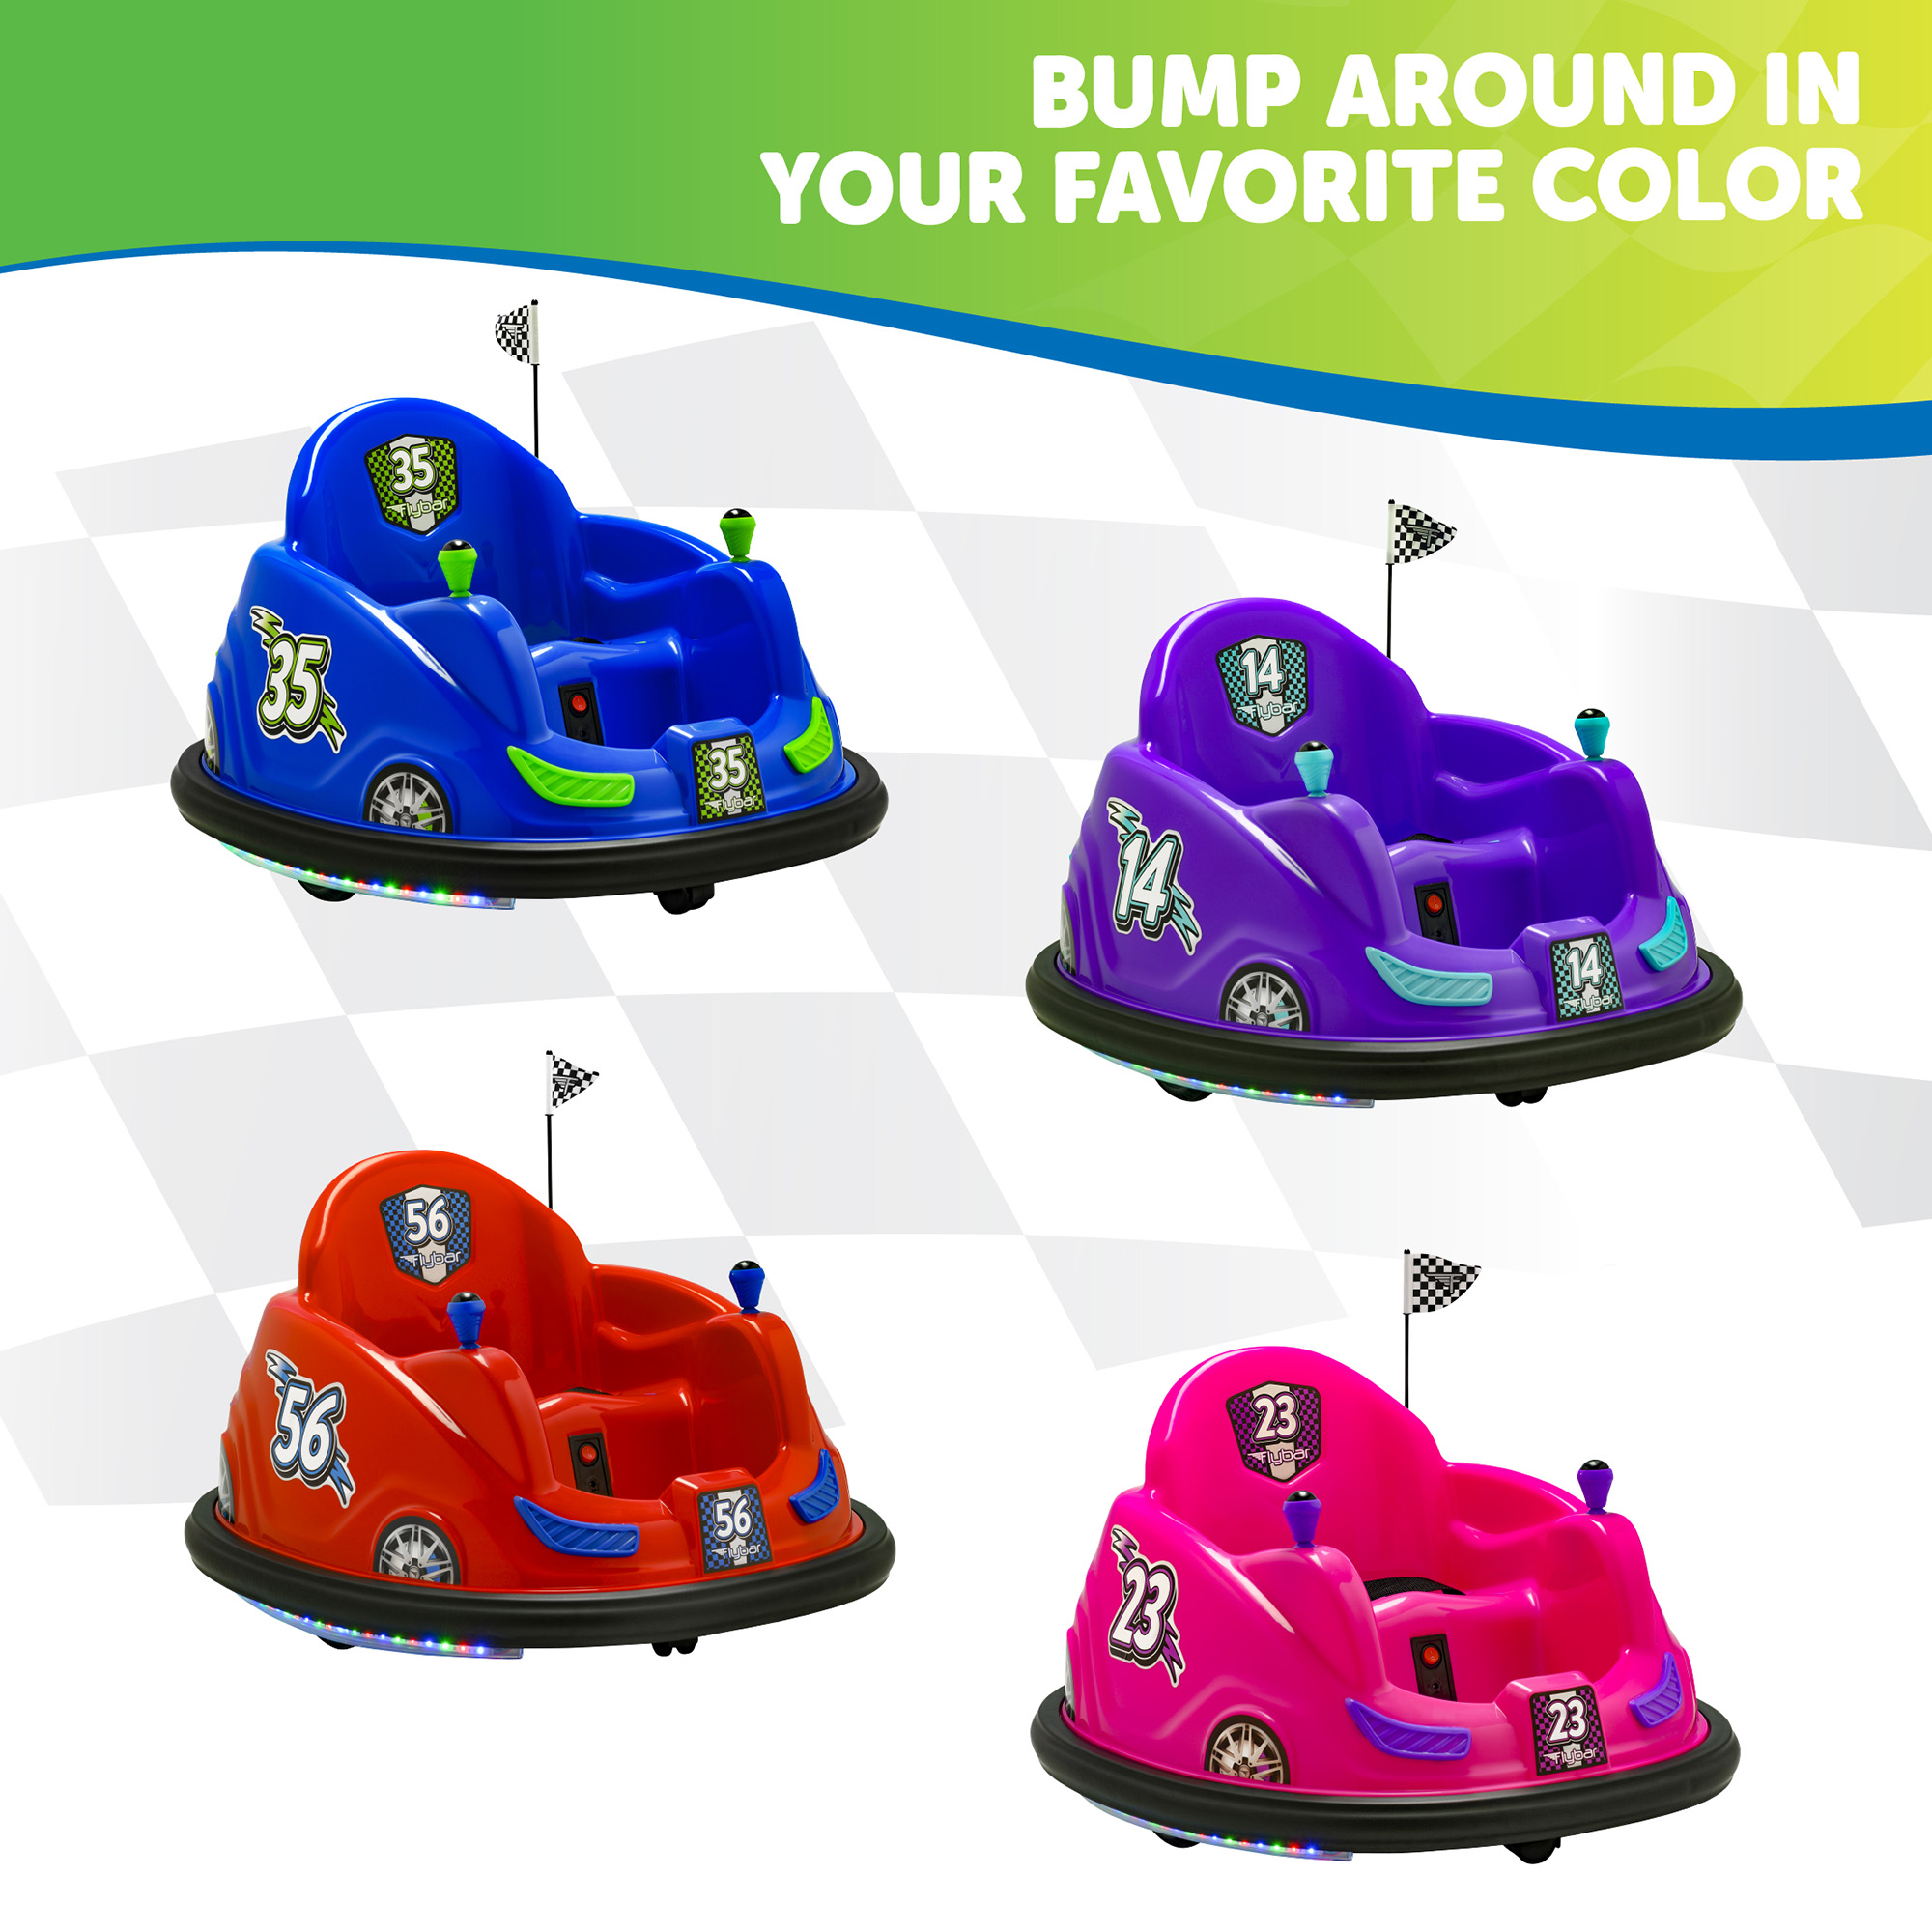 Gabby's Dollhouse 6 Volts Bumper Car, Battery Powered Ride on, Fun LED Lights, Charger, Ages 1.5 - 4 Years, for Boys and Girls - image 8 of 9